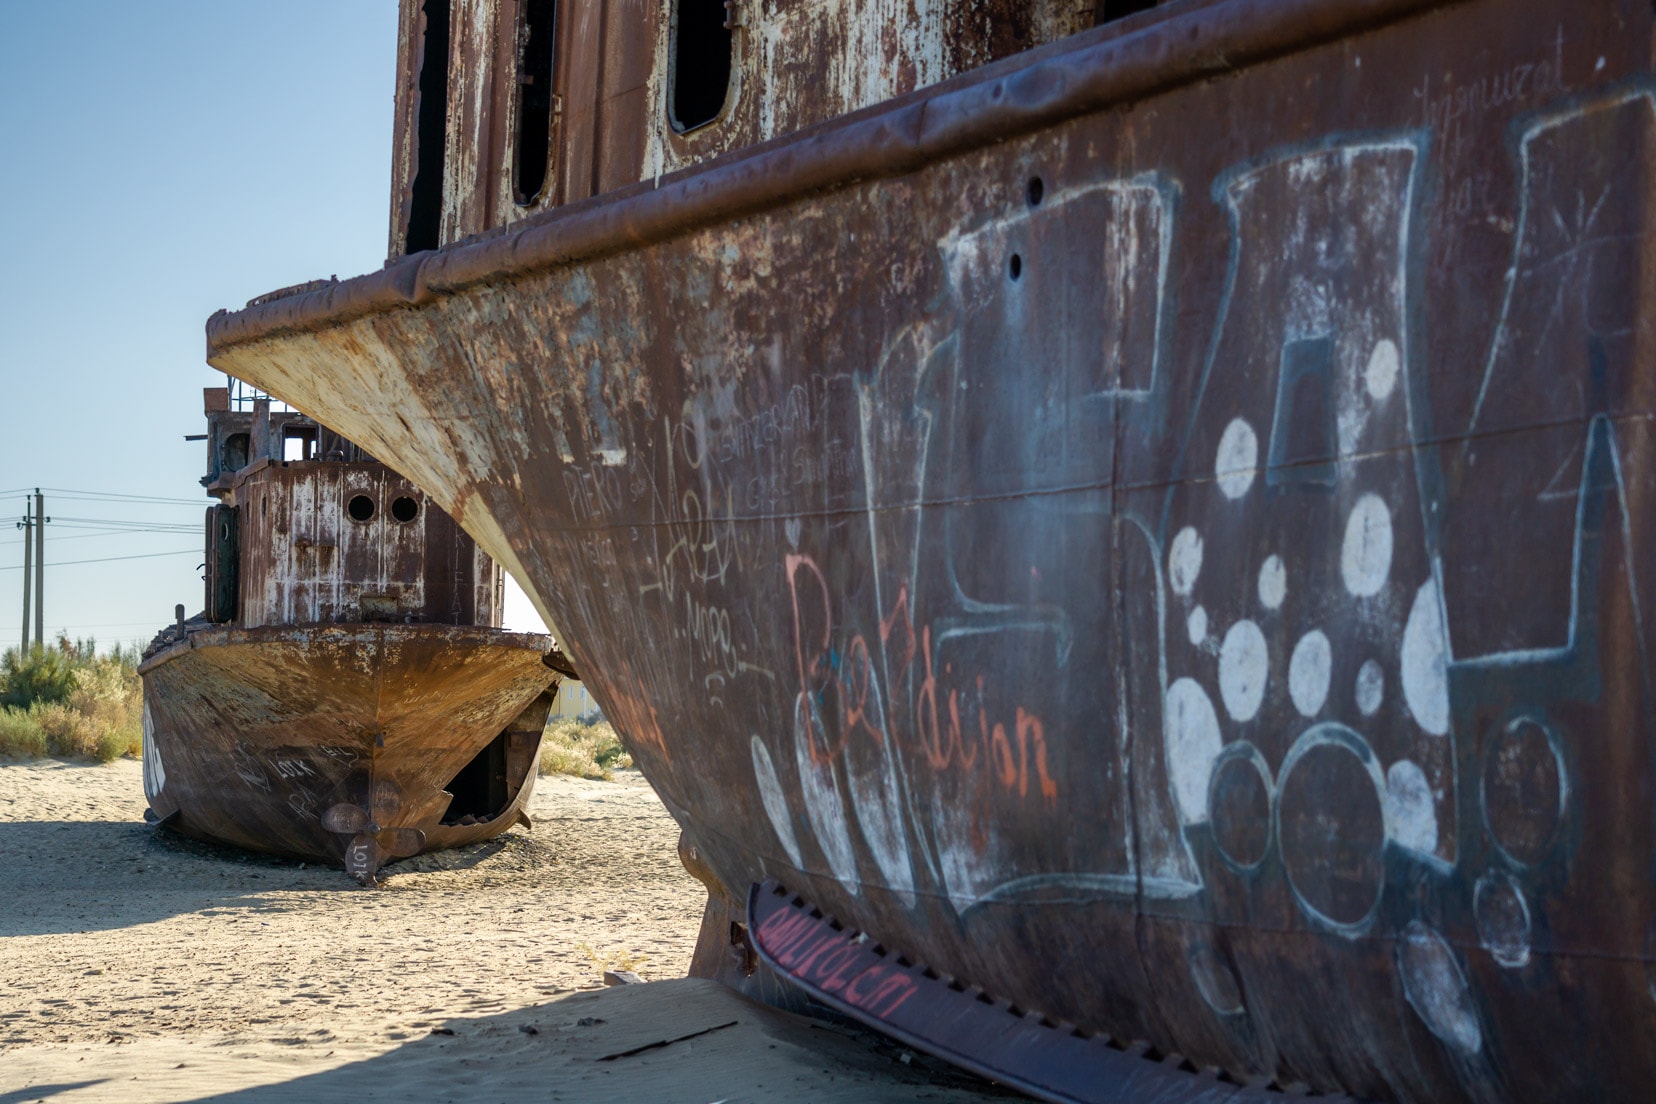 rusty-hull-of-two-ships-on-the-desert-sand